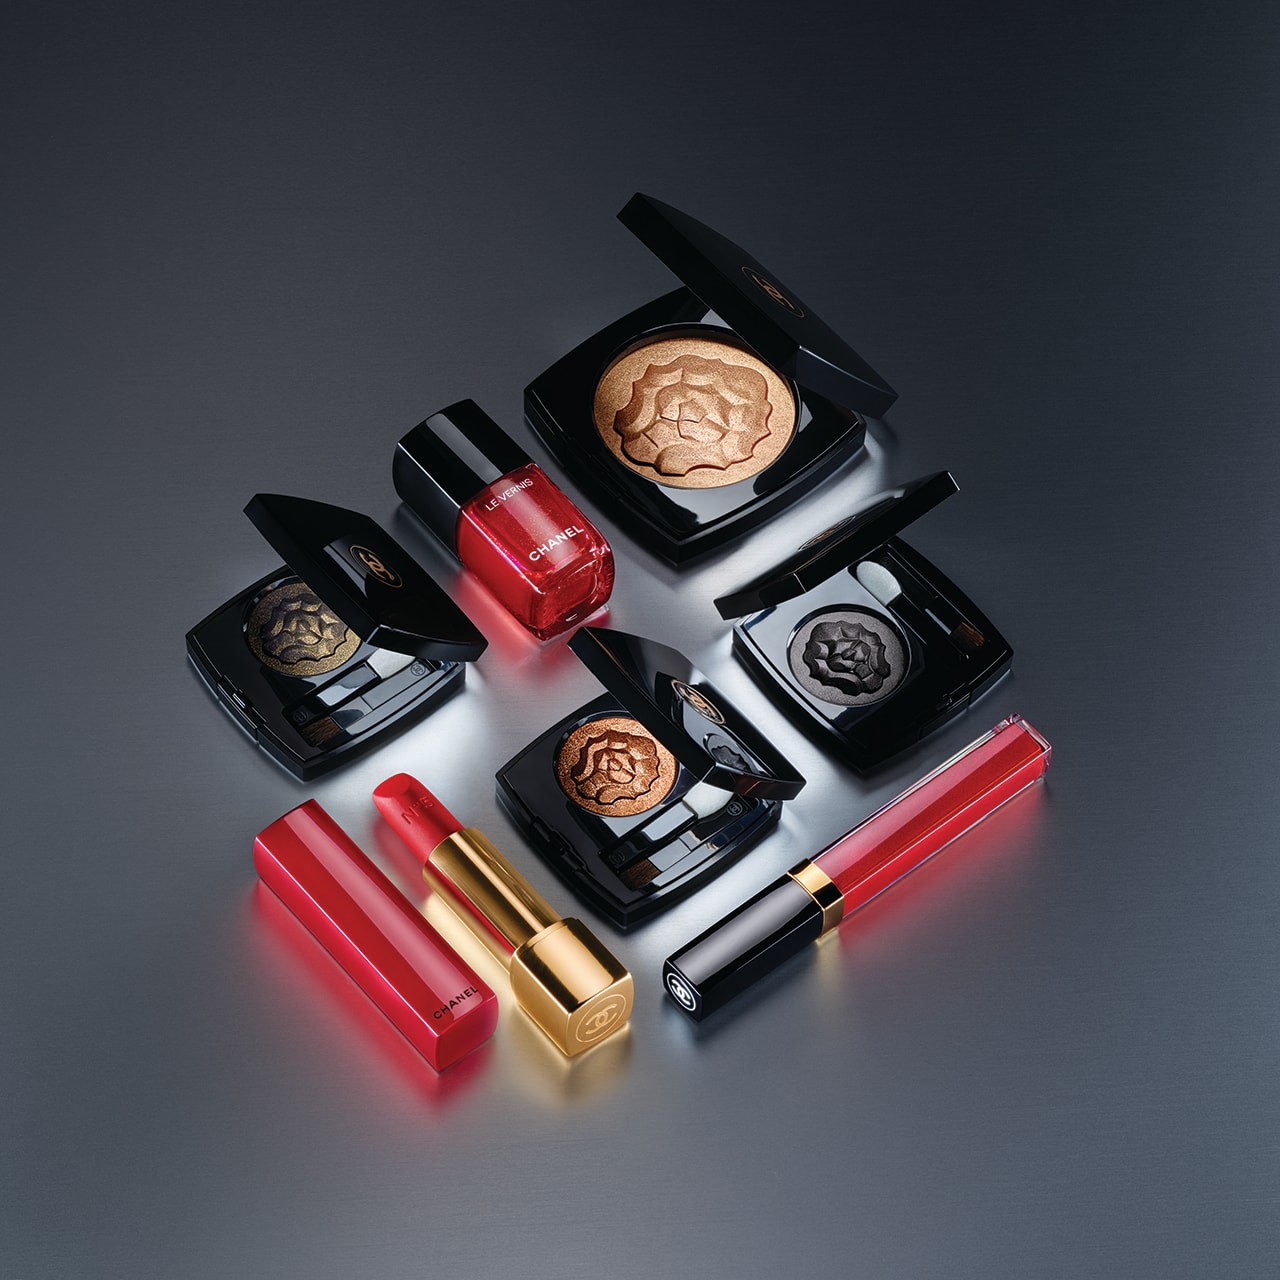 Chanel Beauty Holiday 2018 Makeup Products